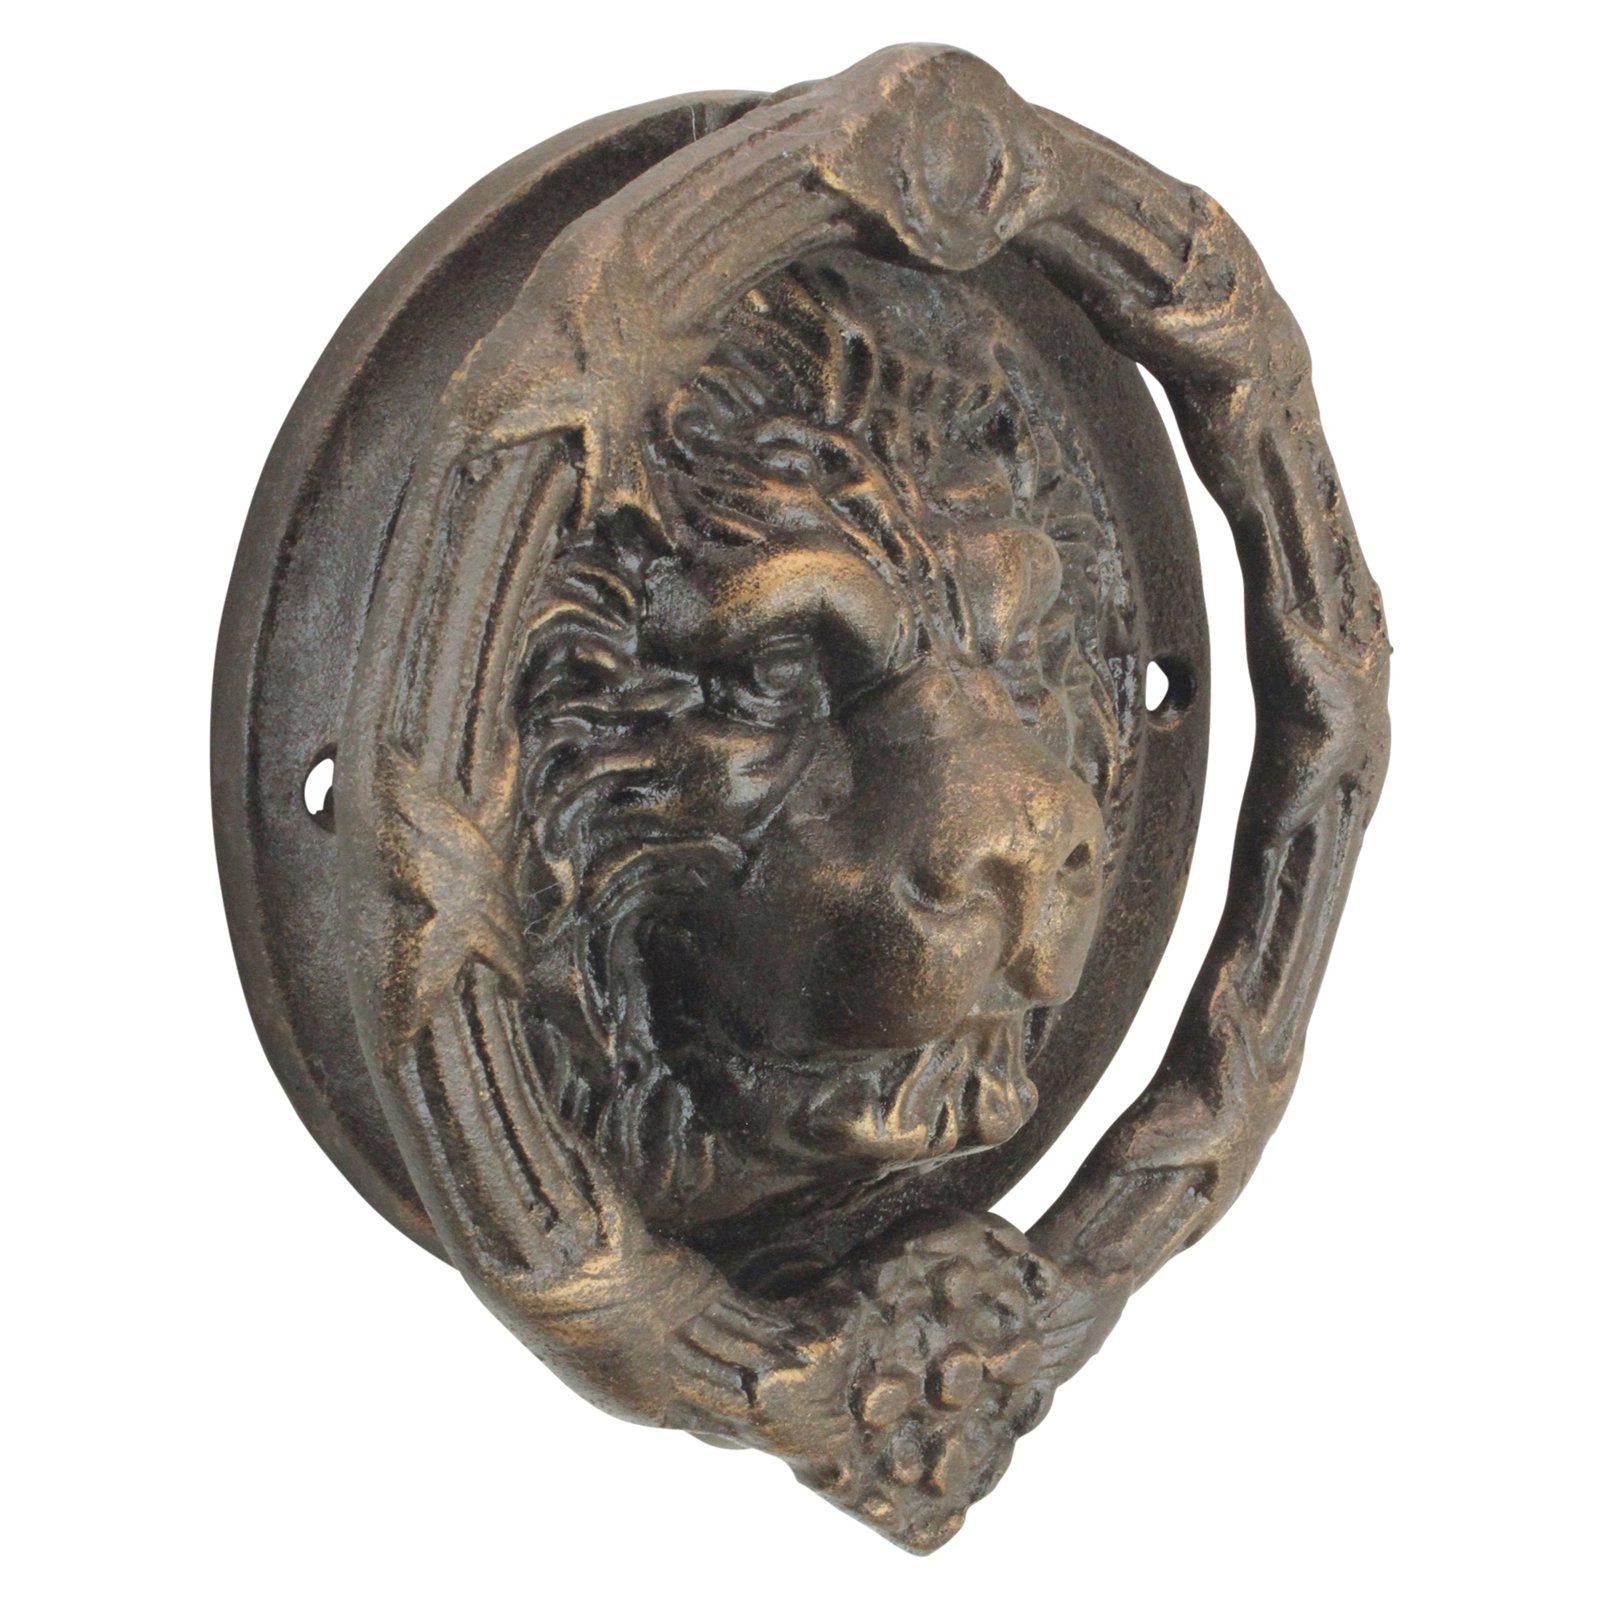 Design Toscano Pride of the Lions Foundry Cast Iron Lion Door Knocker - image 3 of 6